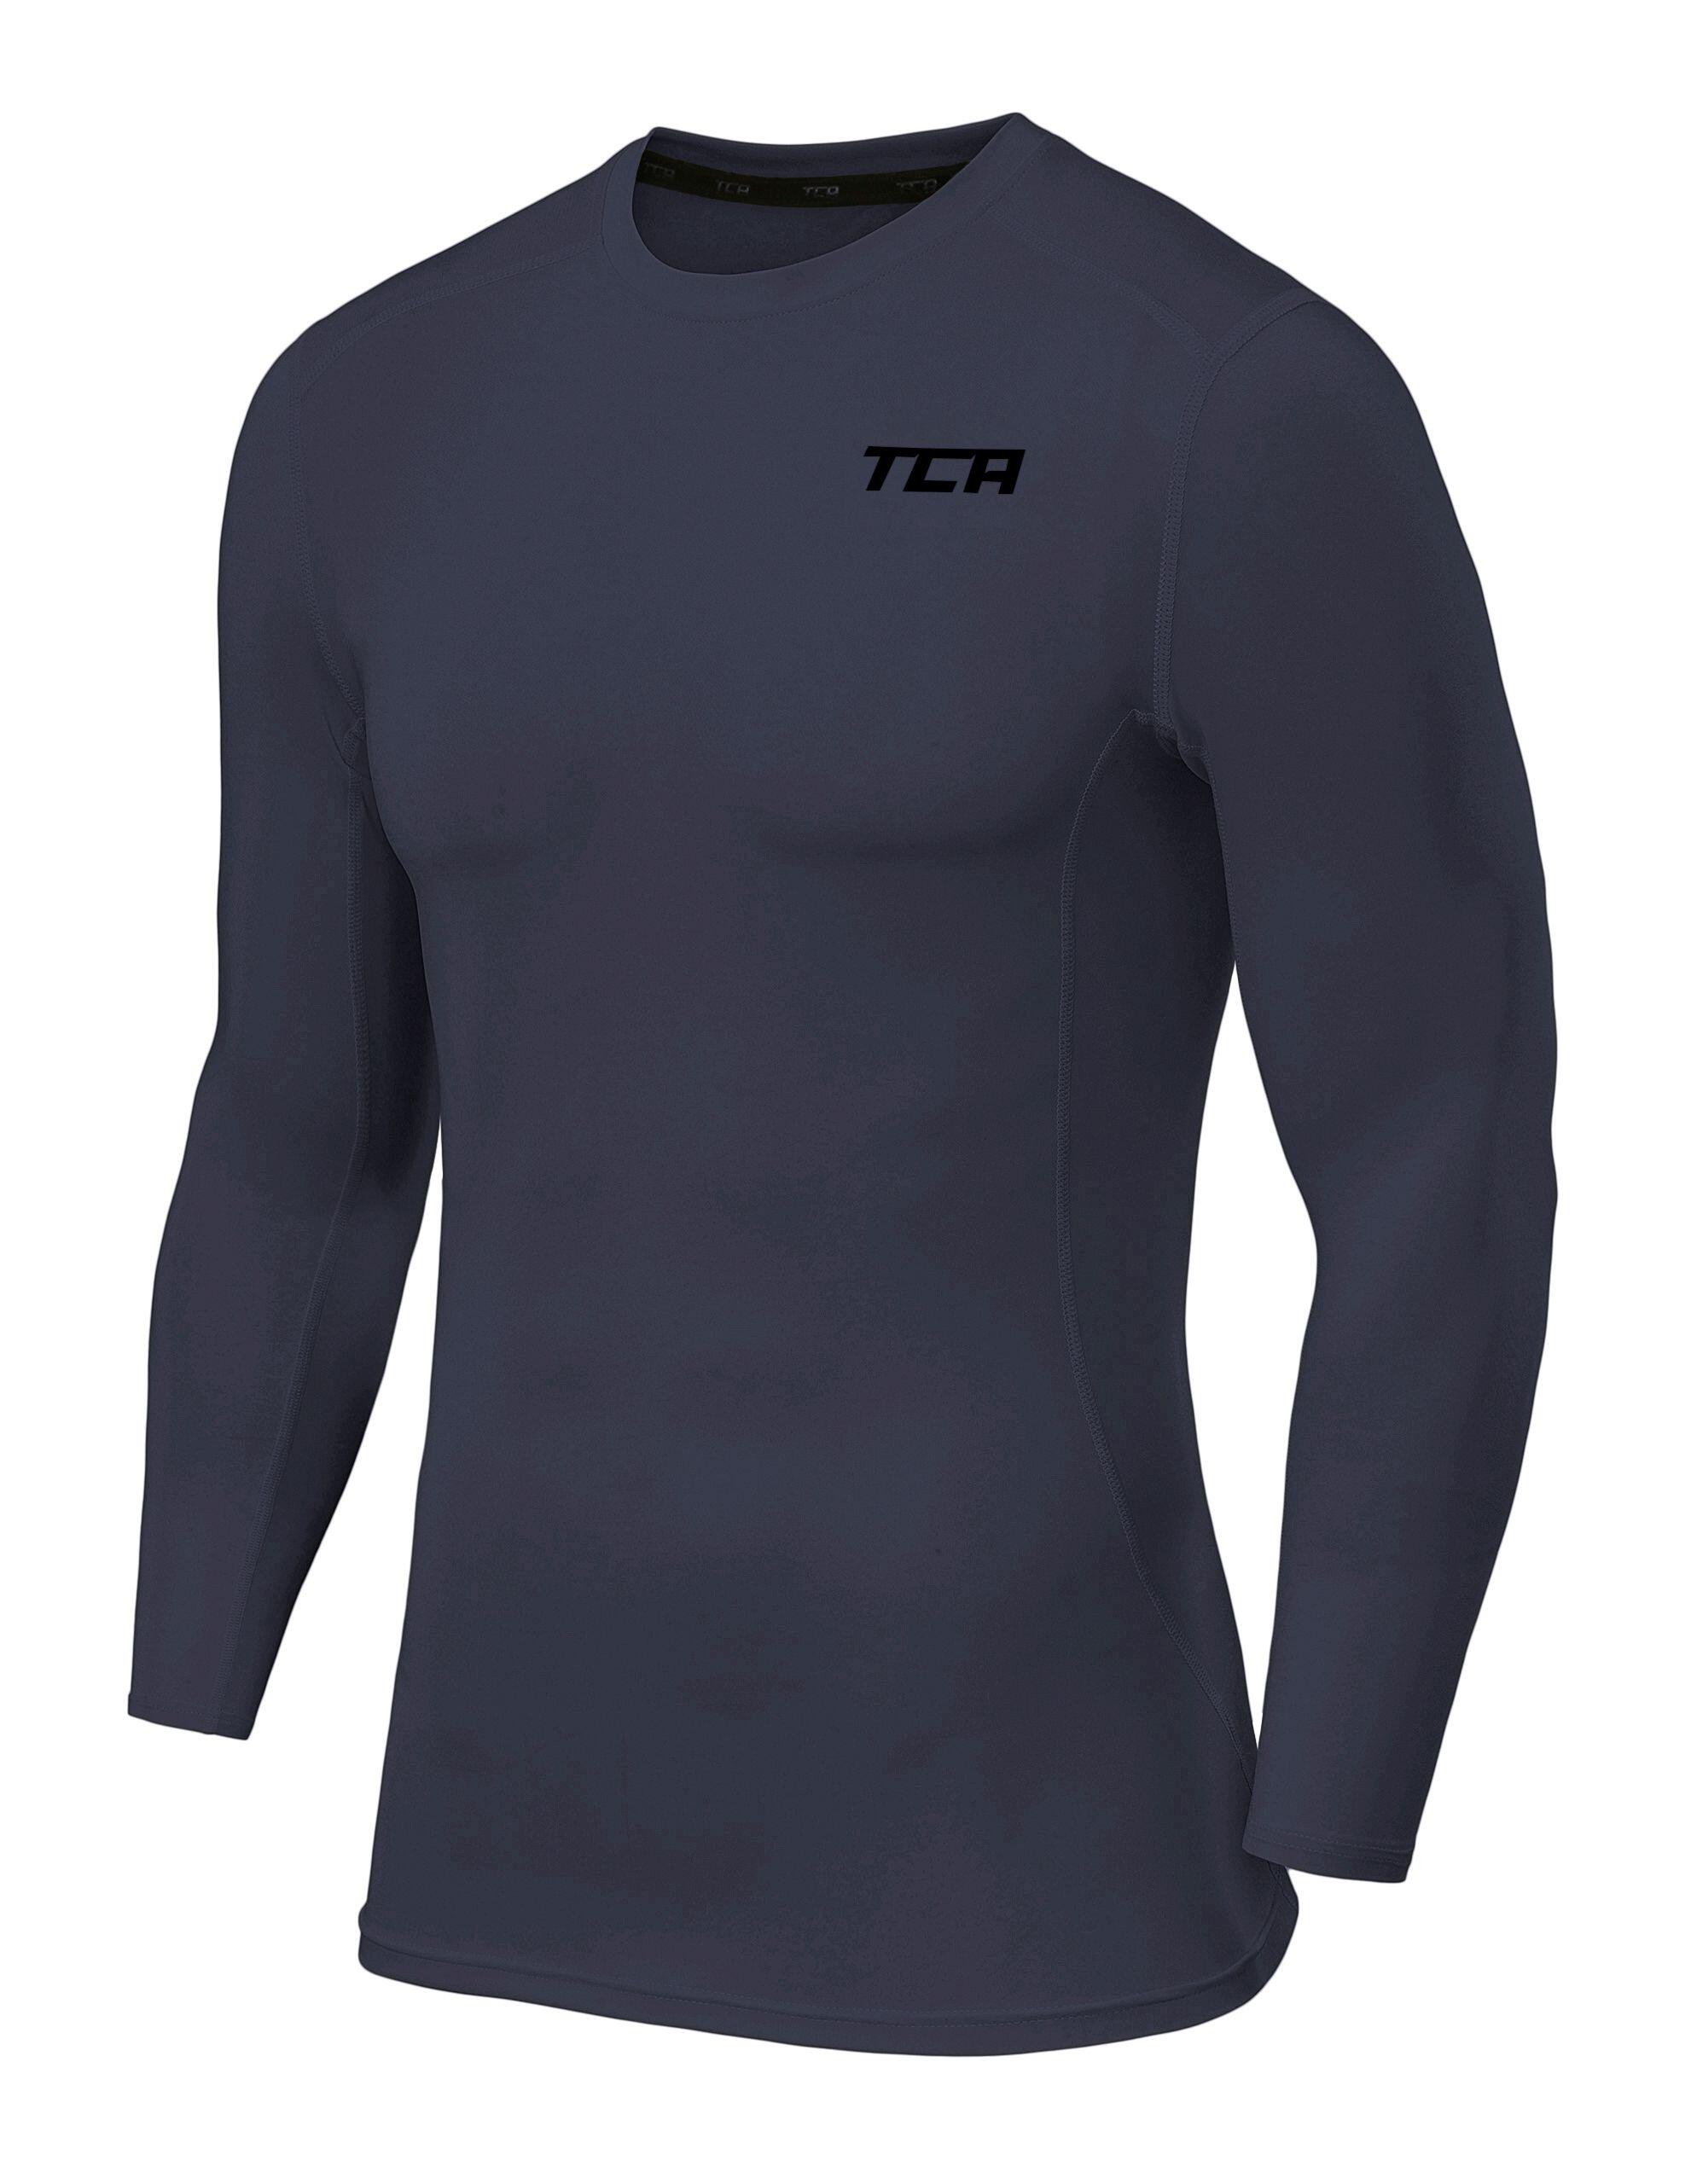 Men's Power Base Layer Compression Long Sleeve Top - Graphite 2/5